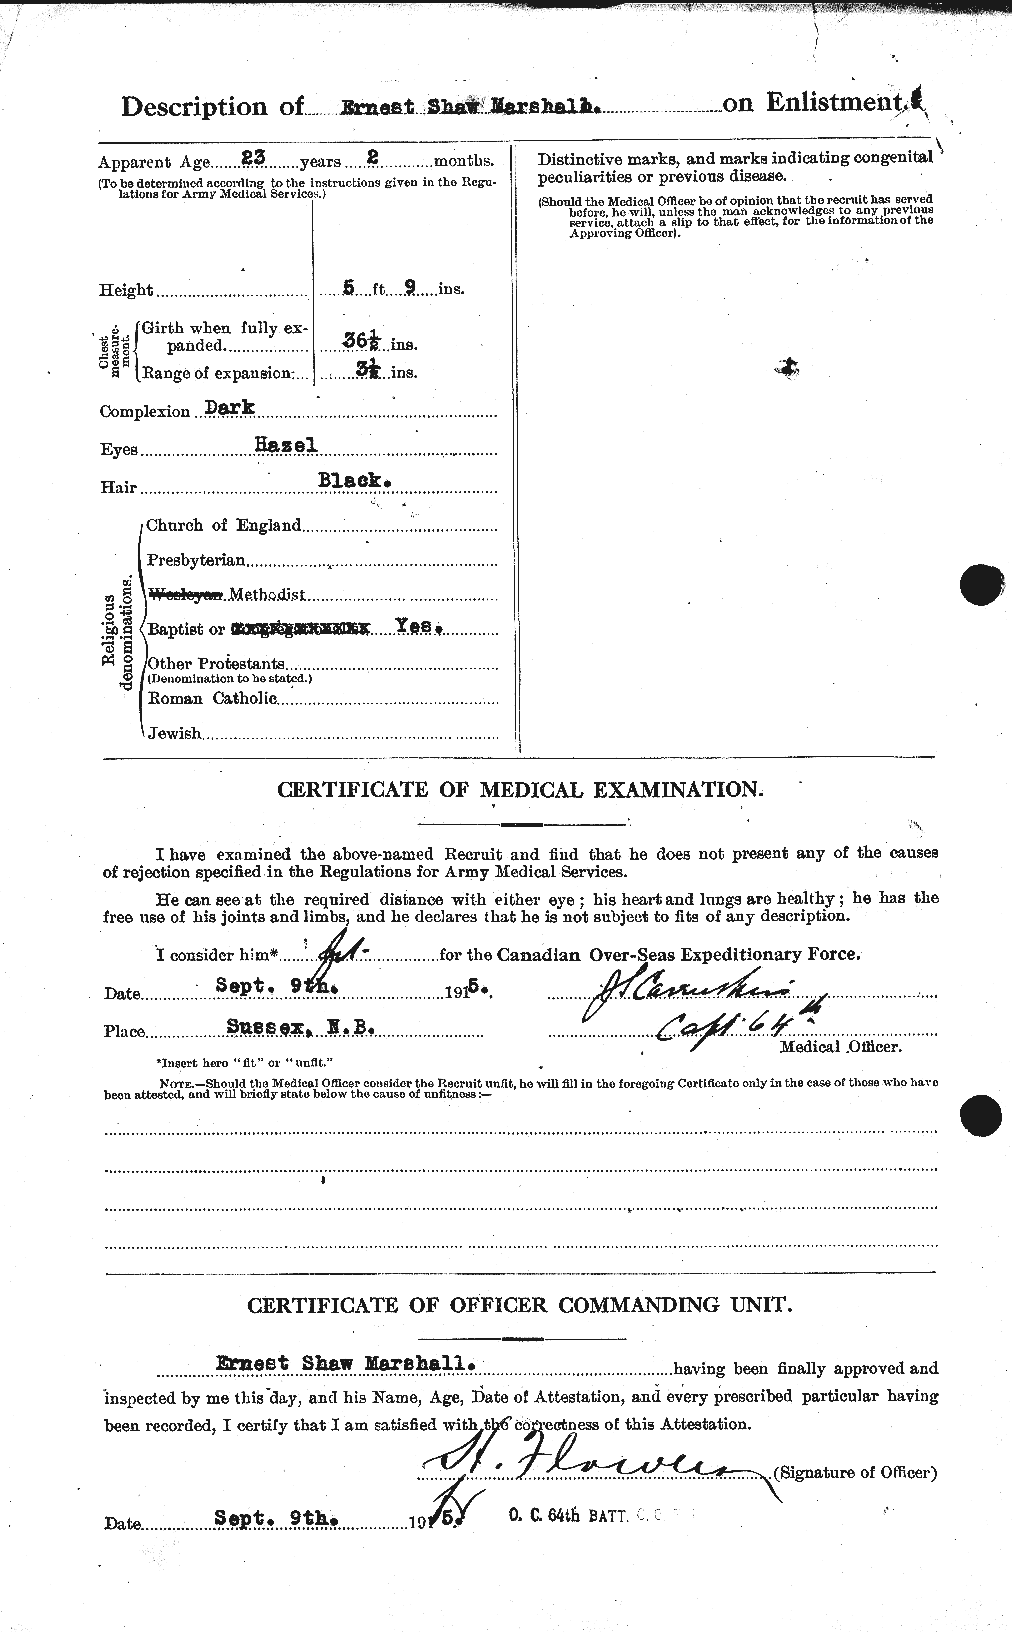 Personnel Records of the First World War - CEF 482137b